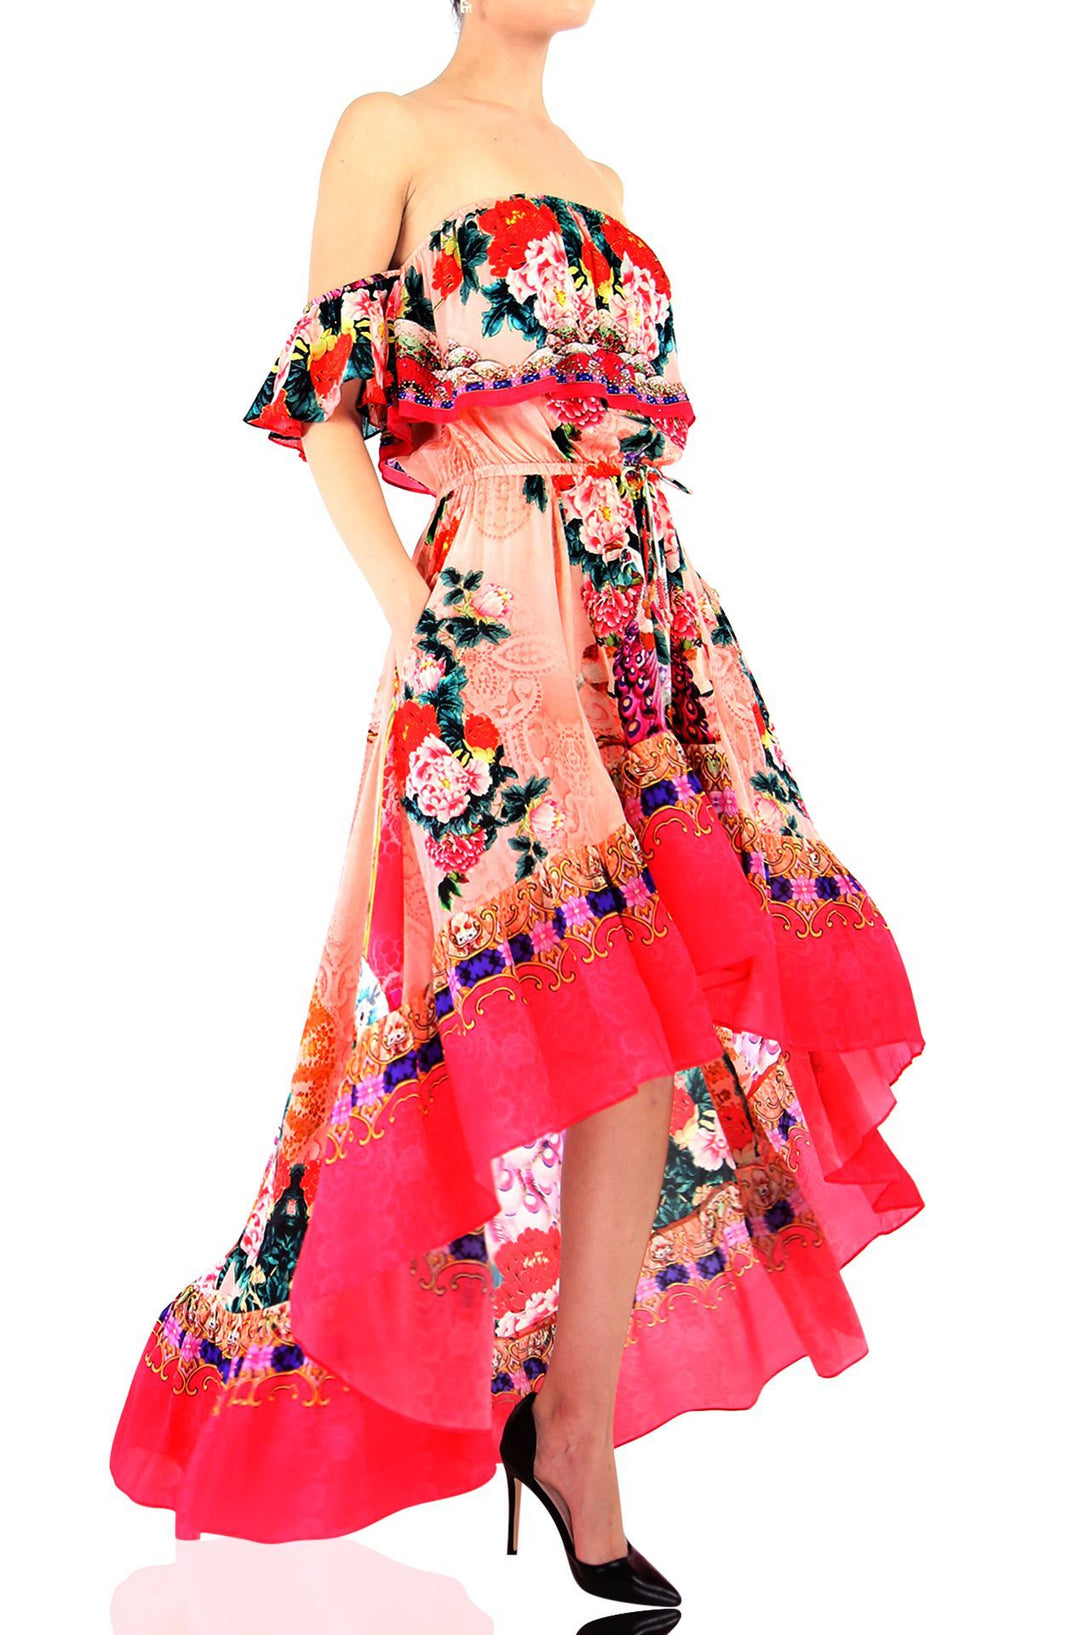 gown for women, high low evening dresses, backless maxi dress, Shahida Parides, maxi dresses for women,